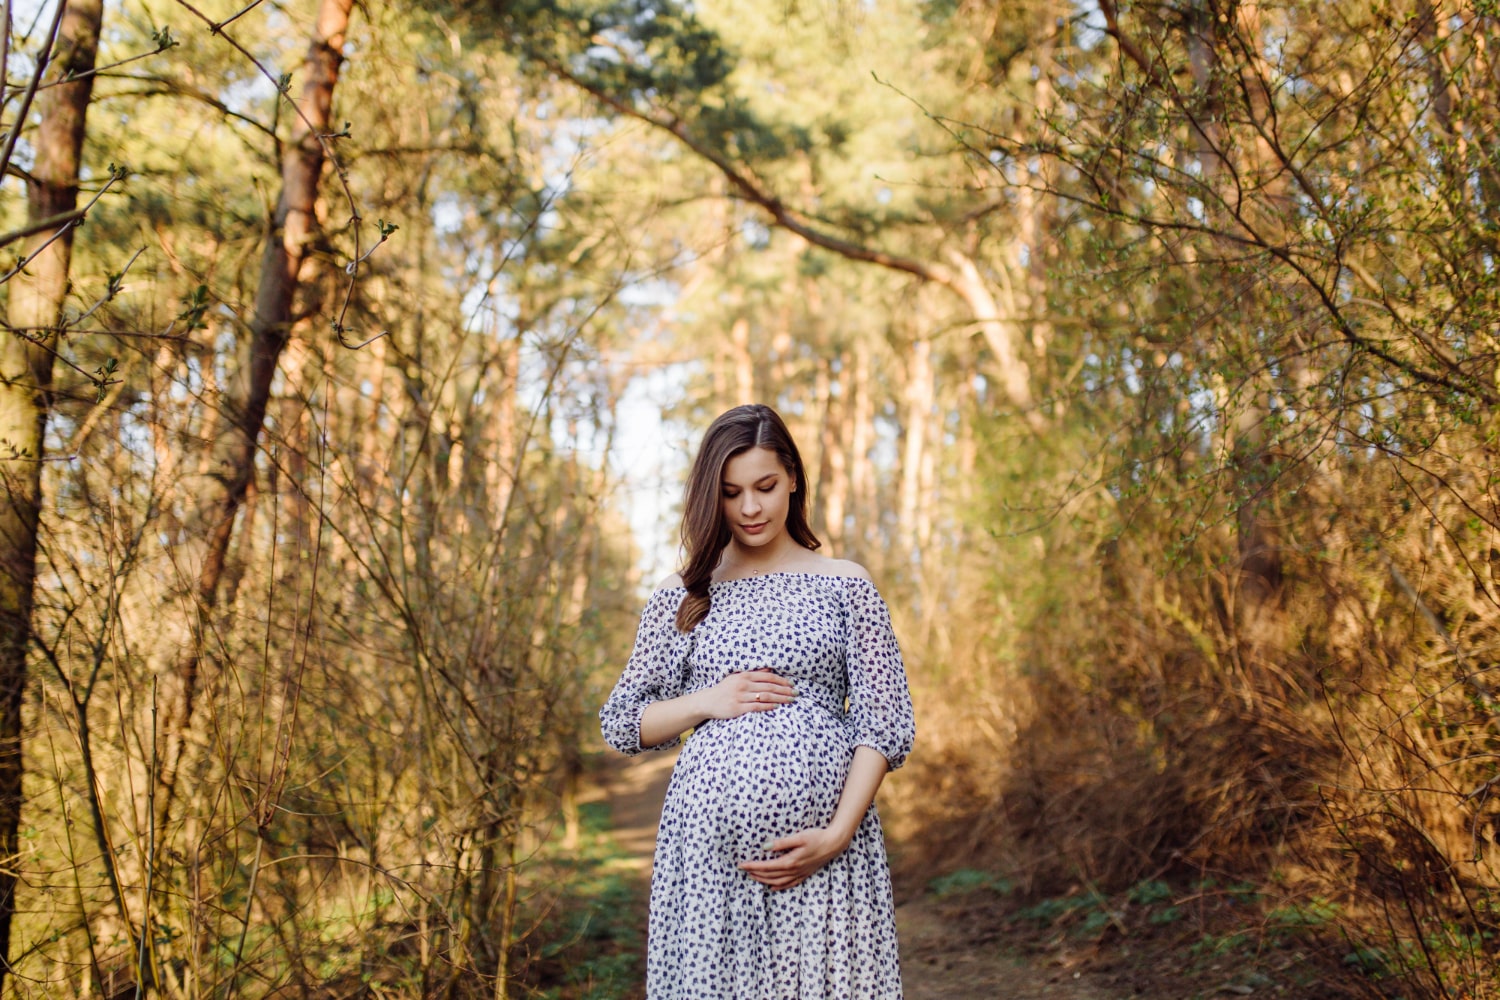 :Bump bliss: Baby shower photo pose, capturing glowing mom-to-be in radiant anticipation